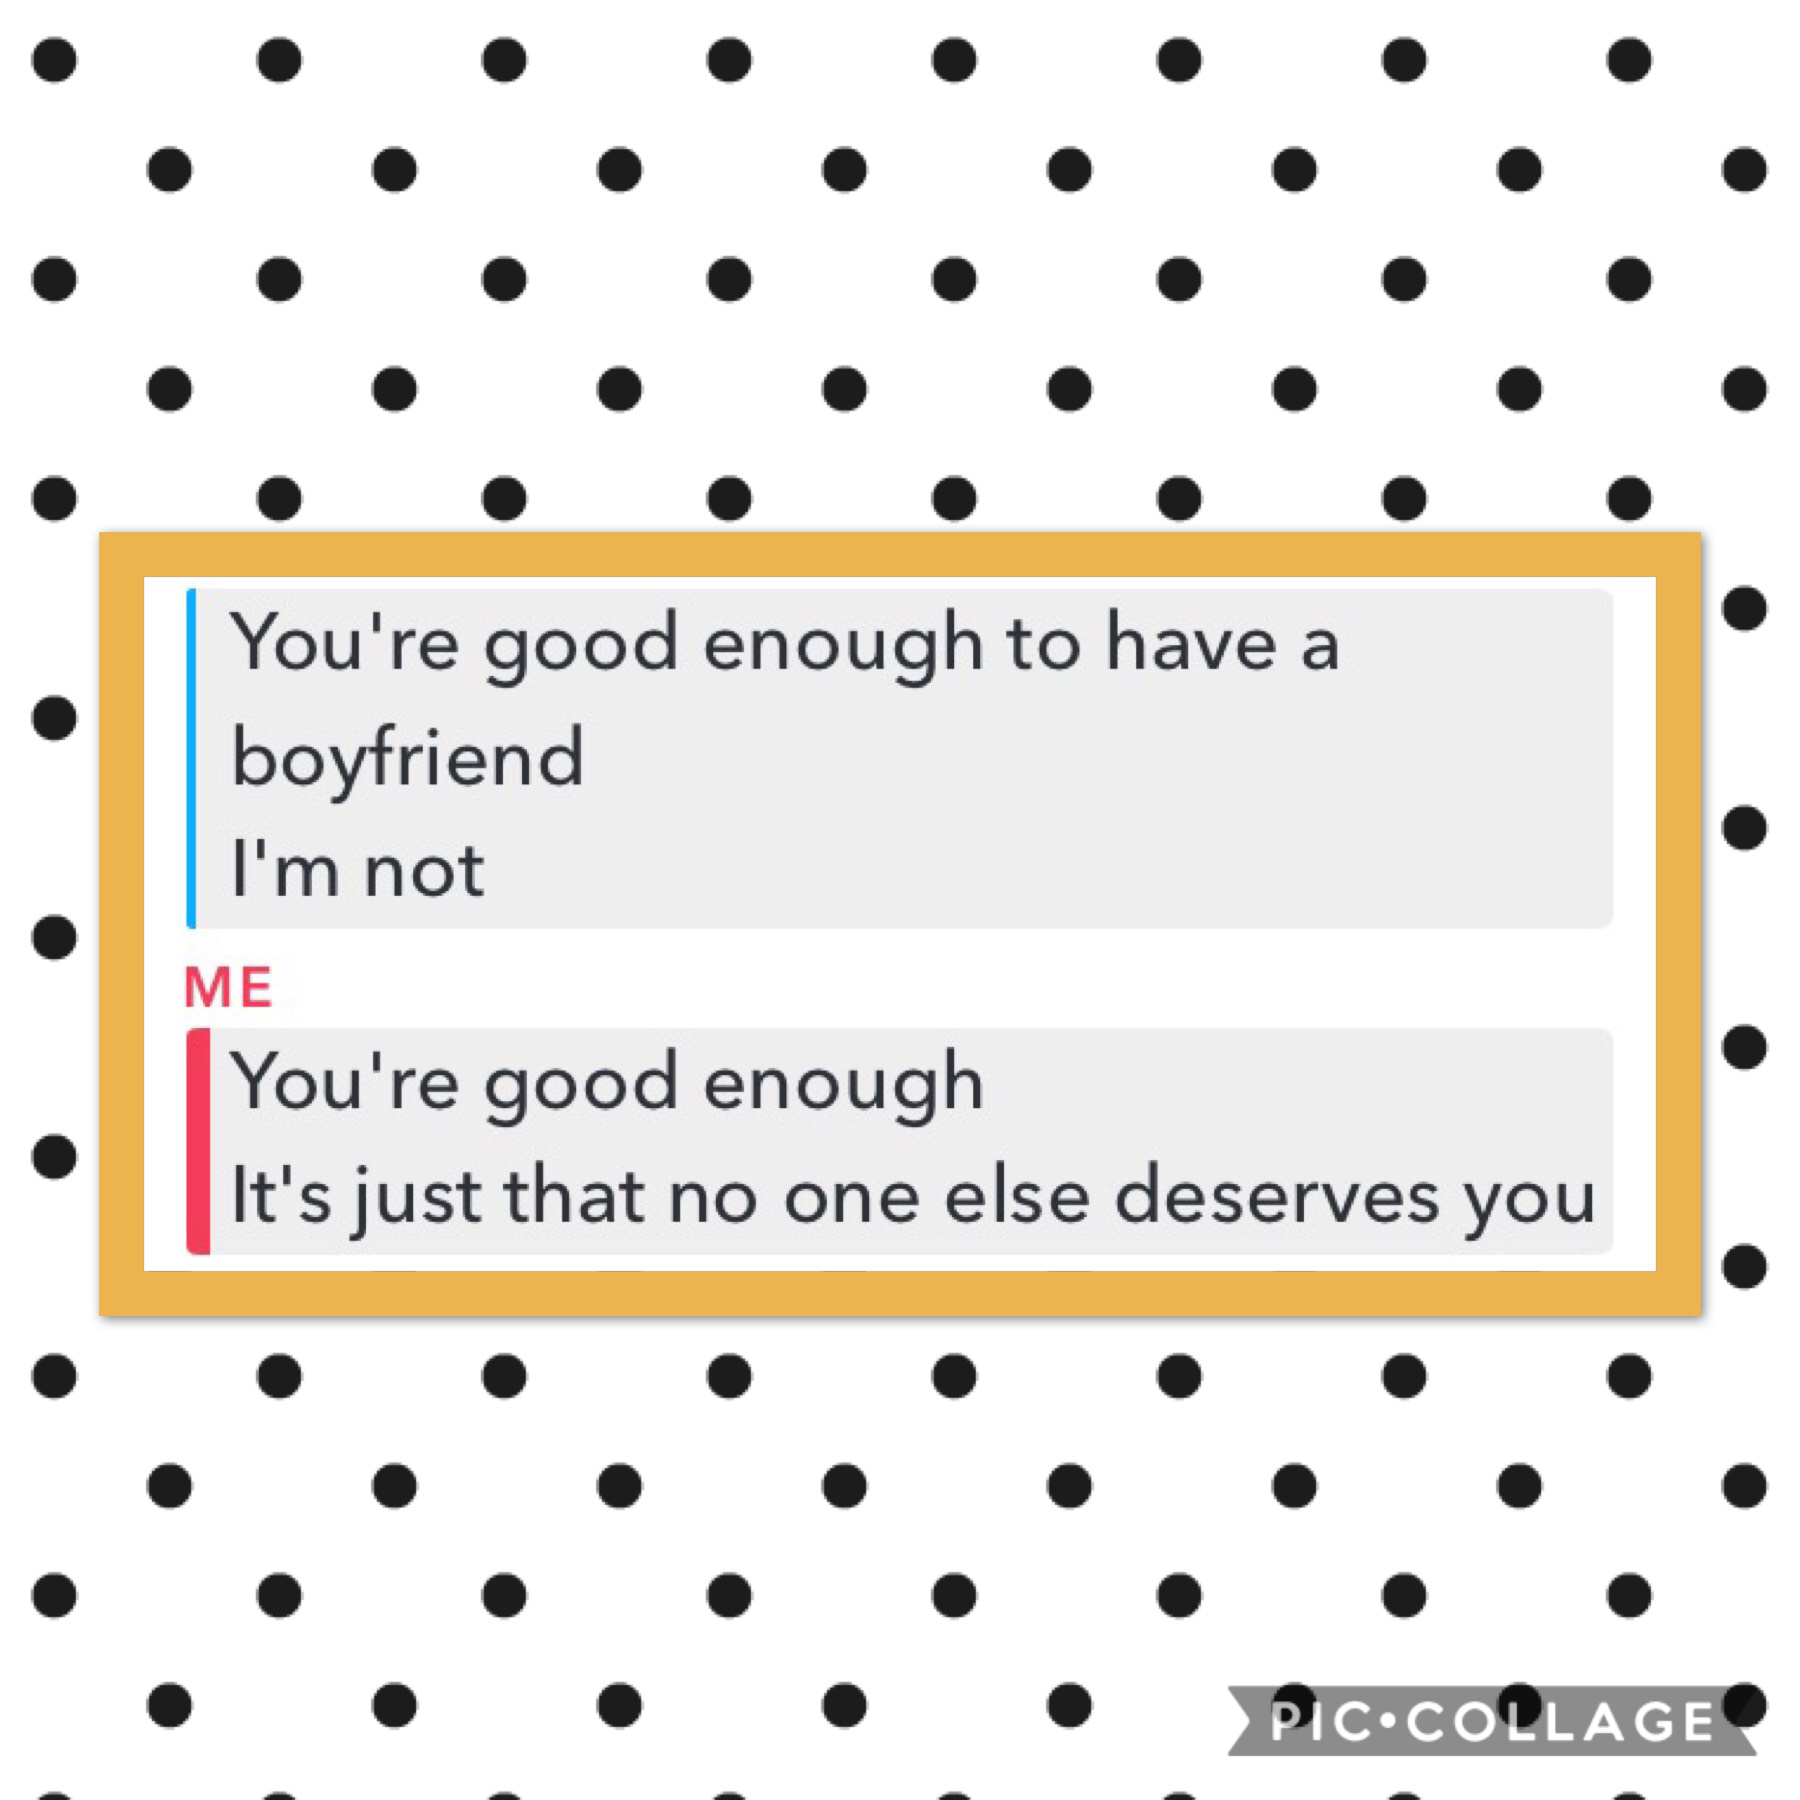 *(context of the pic: a convo between my best friend and i over a year ago) /// y’all can i jus. gush a little bit about my bf?? he’s so. amazing in literally every way, so caring and kind to me and protective when i need it, always there for me when i ge